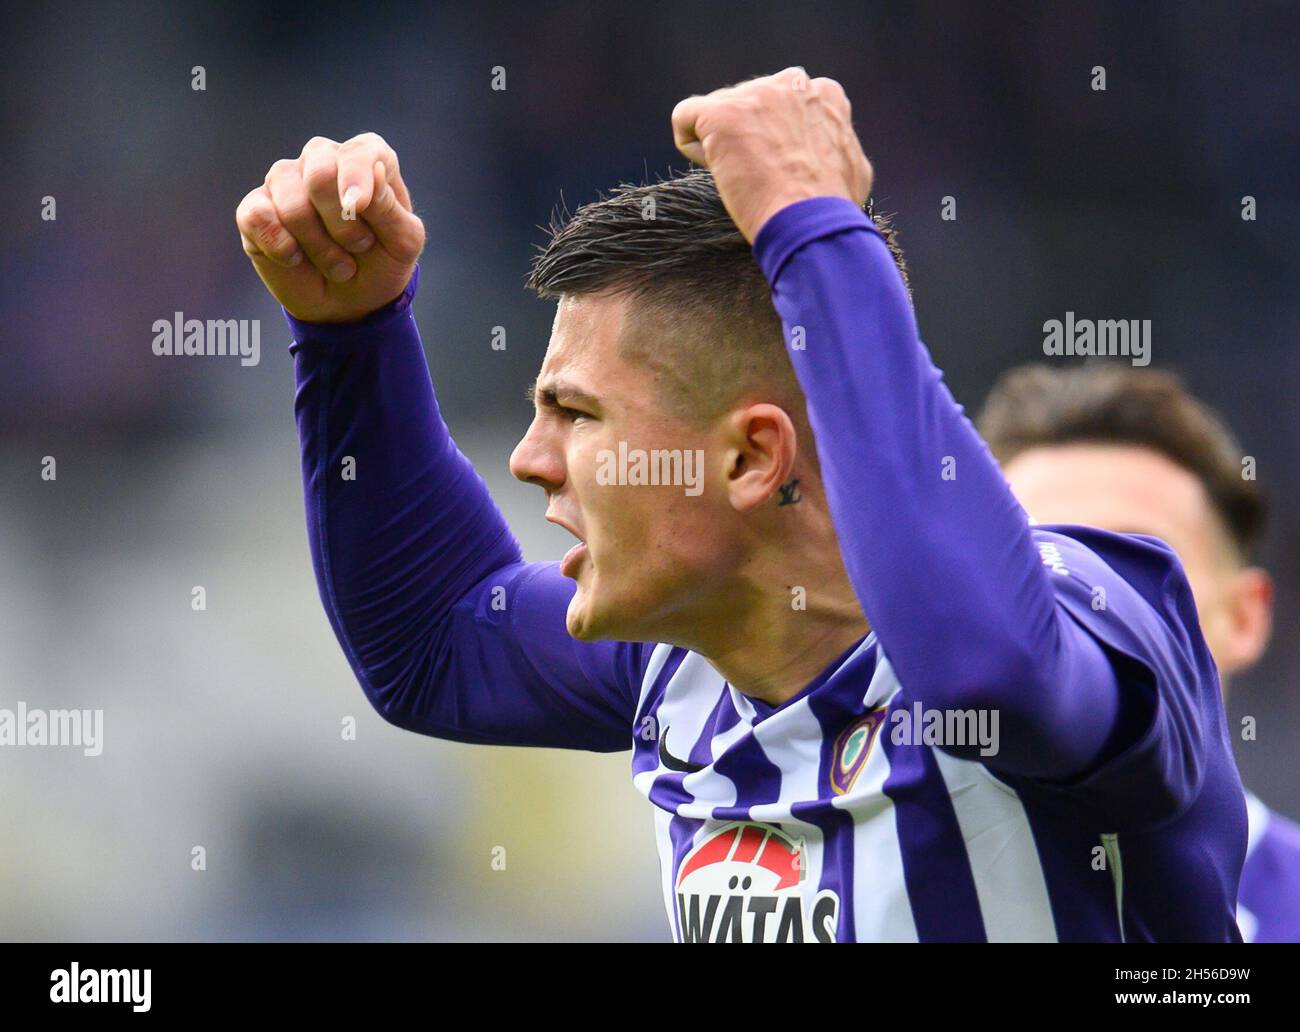 07 November 2021, Saxony, Aue: Football: 2. Bundesliga, Erzgebirge Aue - 1. FC Heidenheim, Matchday 13, Erzgebirgsstadion. Aue's Antonio Jonjic (l) celebrates after his goal for 1:0. Photo: Robert Michael/dpa-Zentralbild/dpa - IMPORTANT NOTE: In accordance with the regulations of the DFL Deutsche Fußball Liga and/or the DFB Deutscher Fußball-Bund, it is prohibited to use or have used photographs taken in the stadium and/or of the match in the form of sequence pictures and/or video-like photo series. Stock Photo